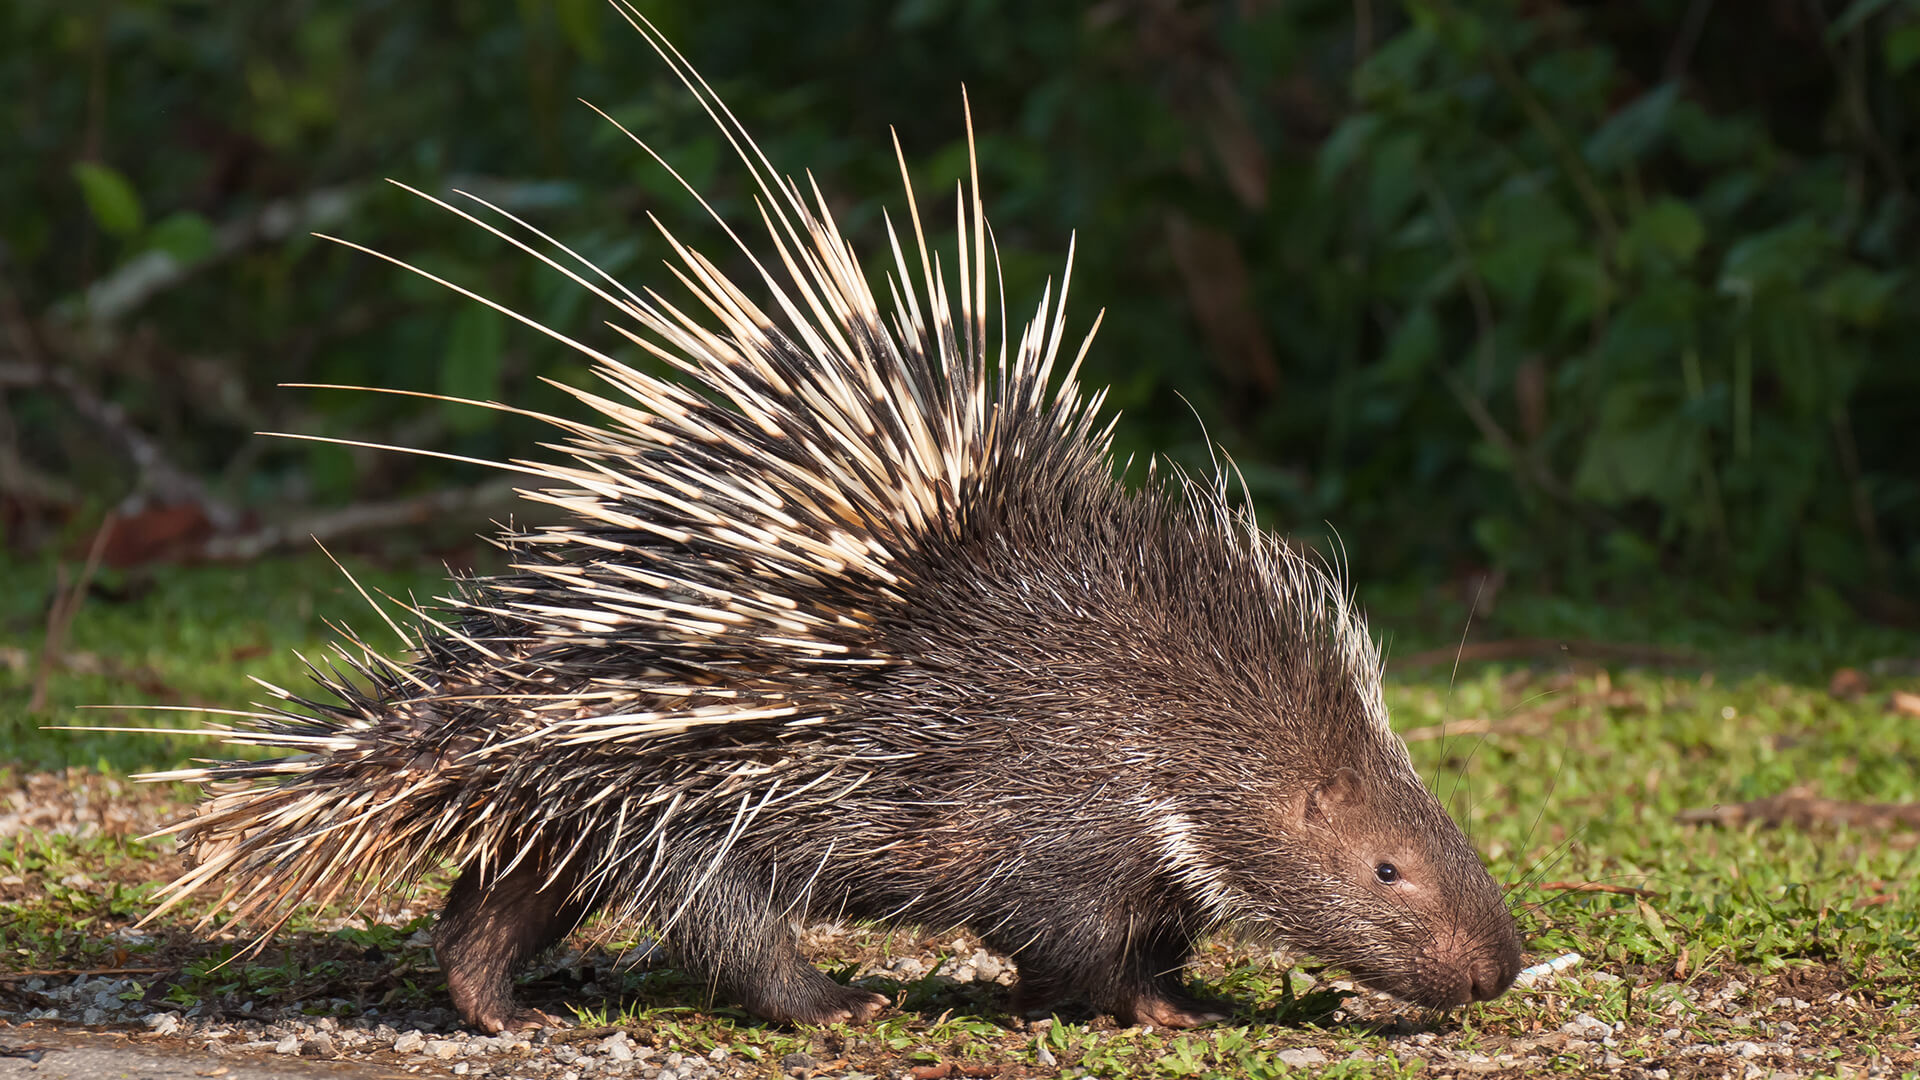 What are the porcupine's enemies?